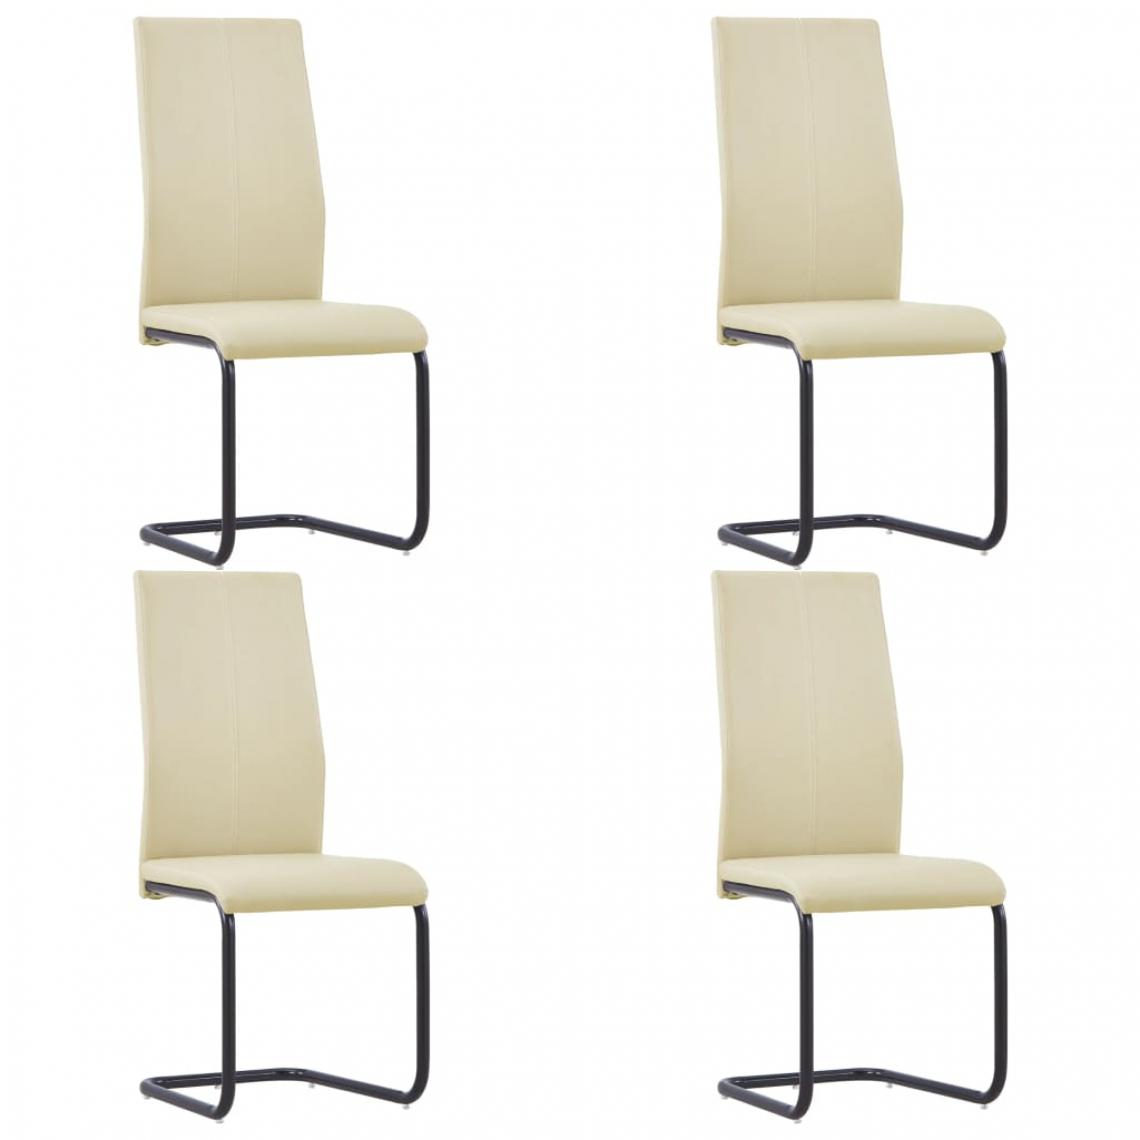 Chunhelife - Chunhelife Chaises de salle à manger cantilever 4pcs Cappuccino Similicuir - Chaises